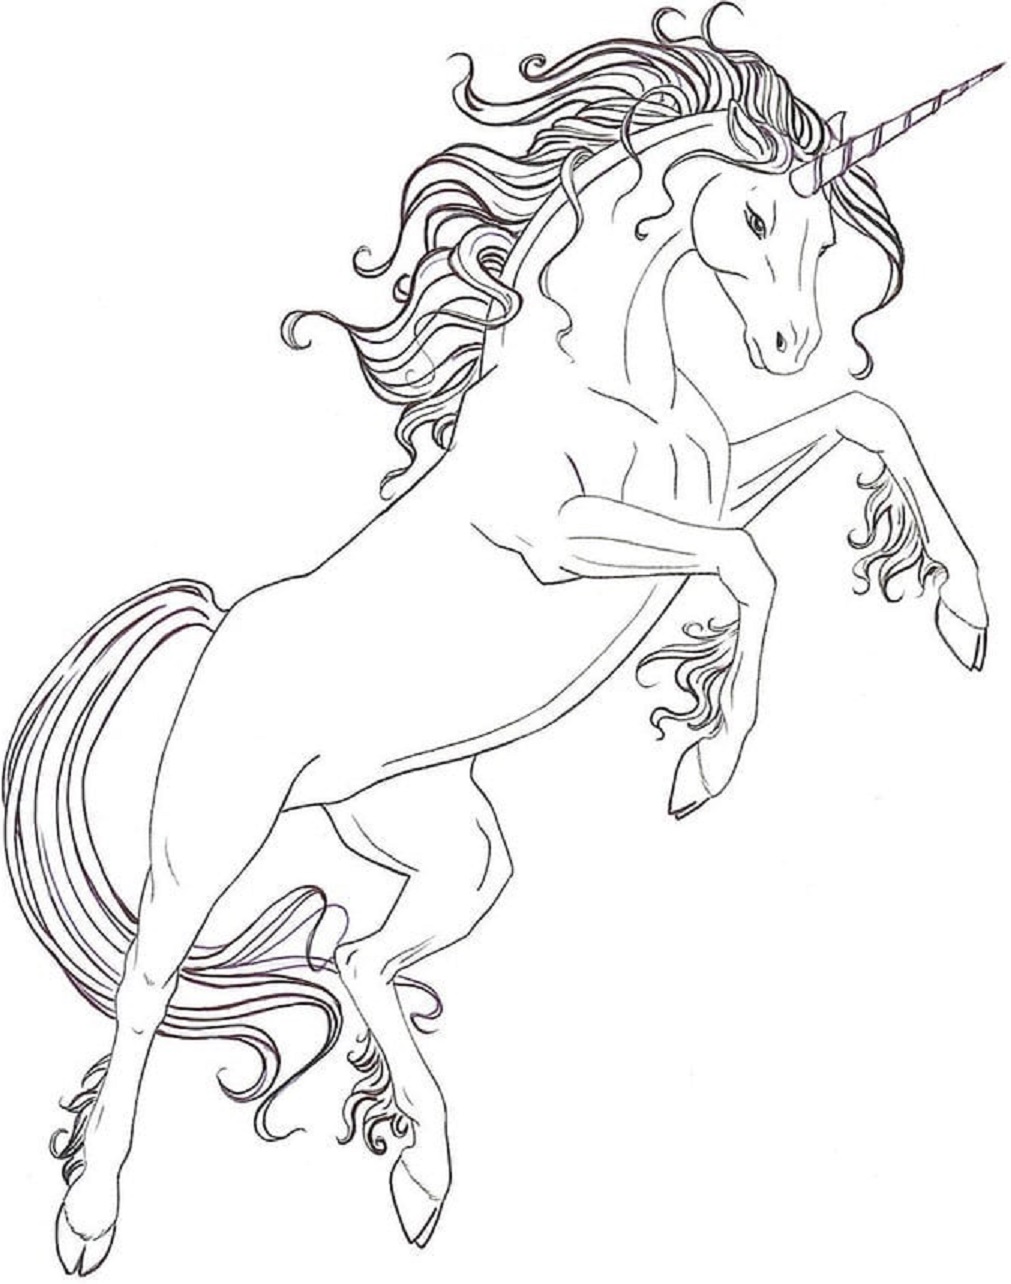 Unicorn Jumping Coloring Page